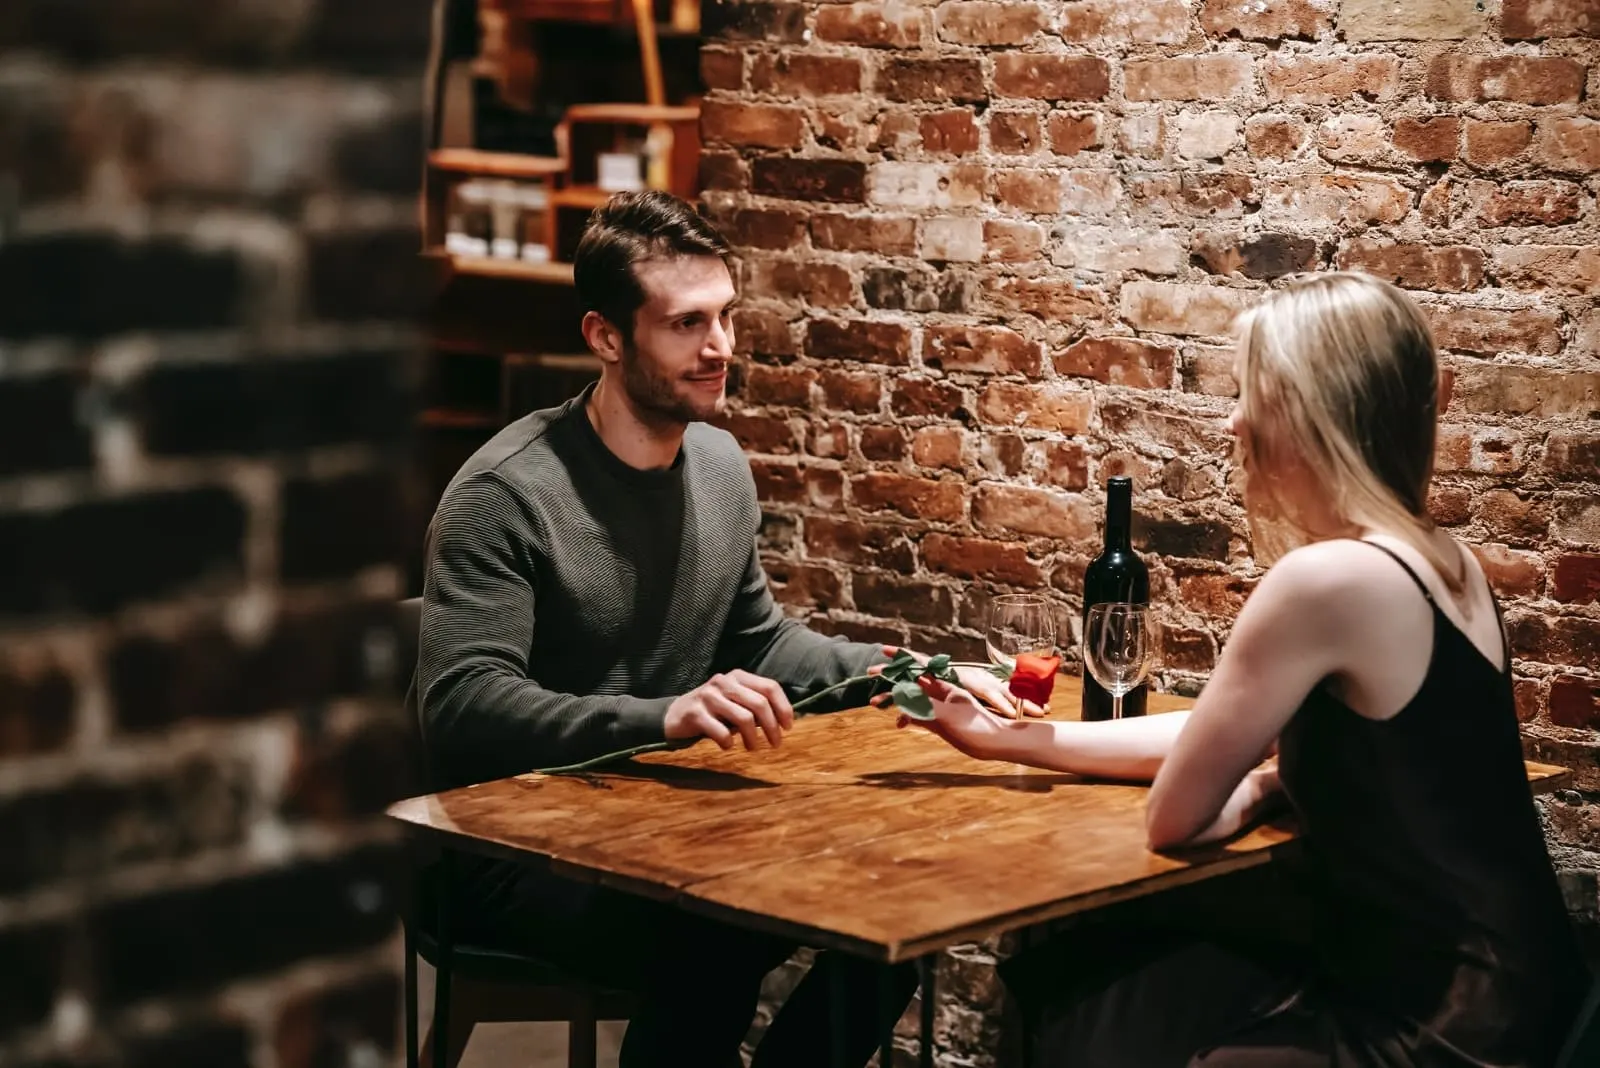 man giving rose to woman while sitting at table